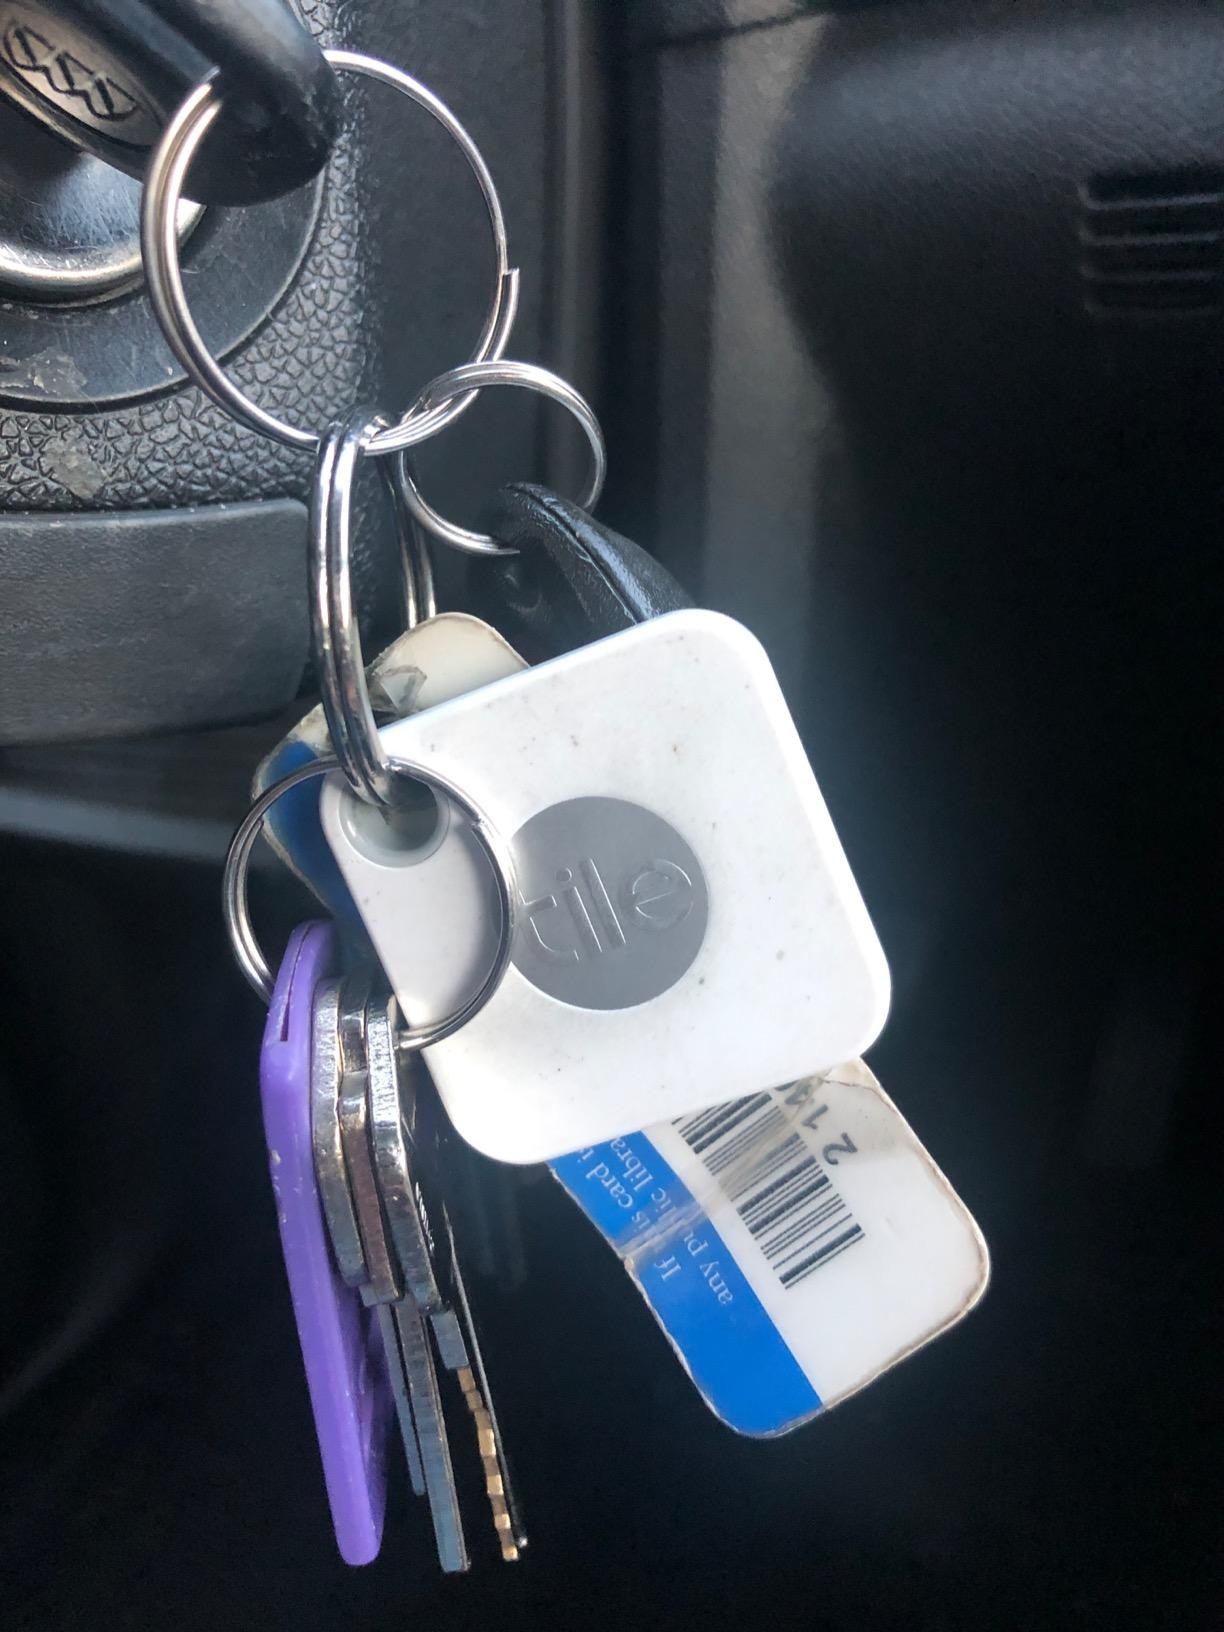 reviewer image of the white Tile attached to car keys